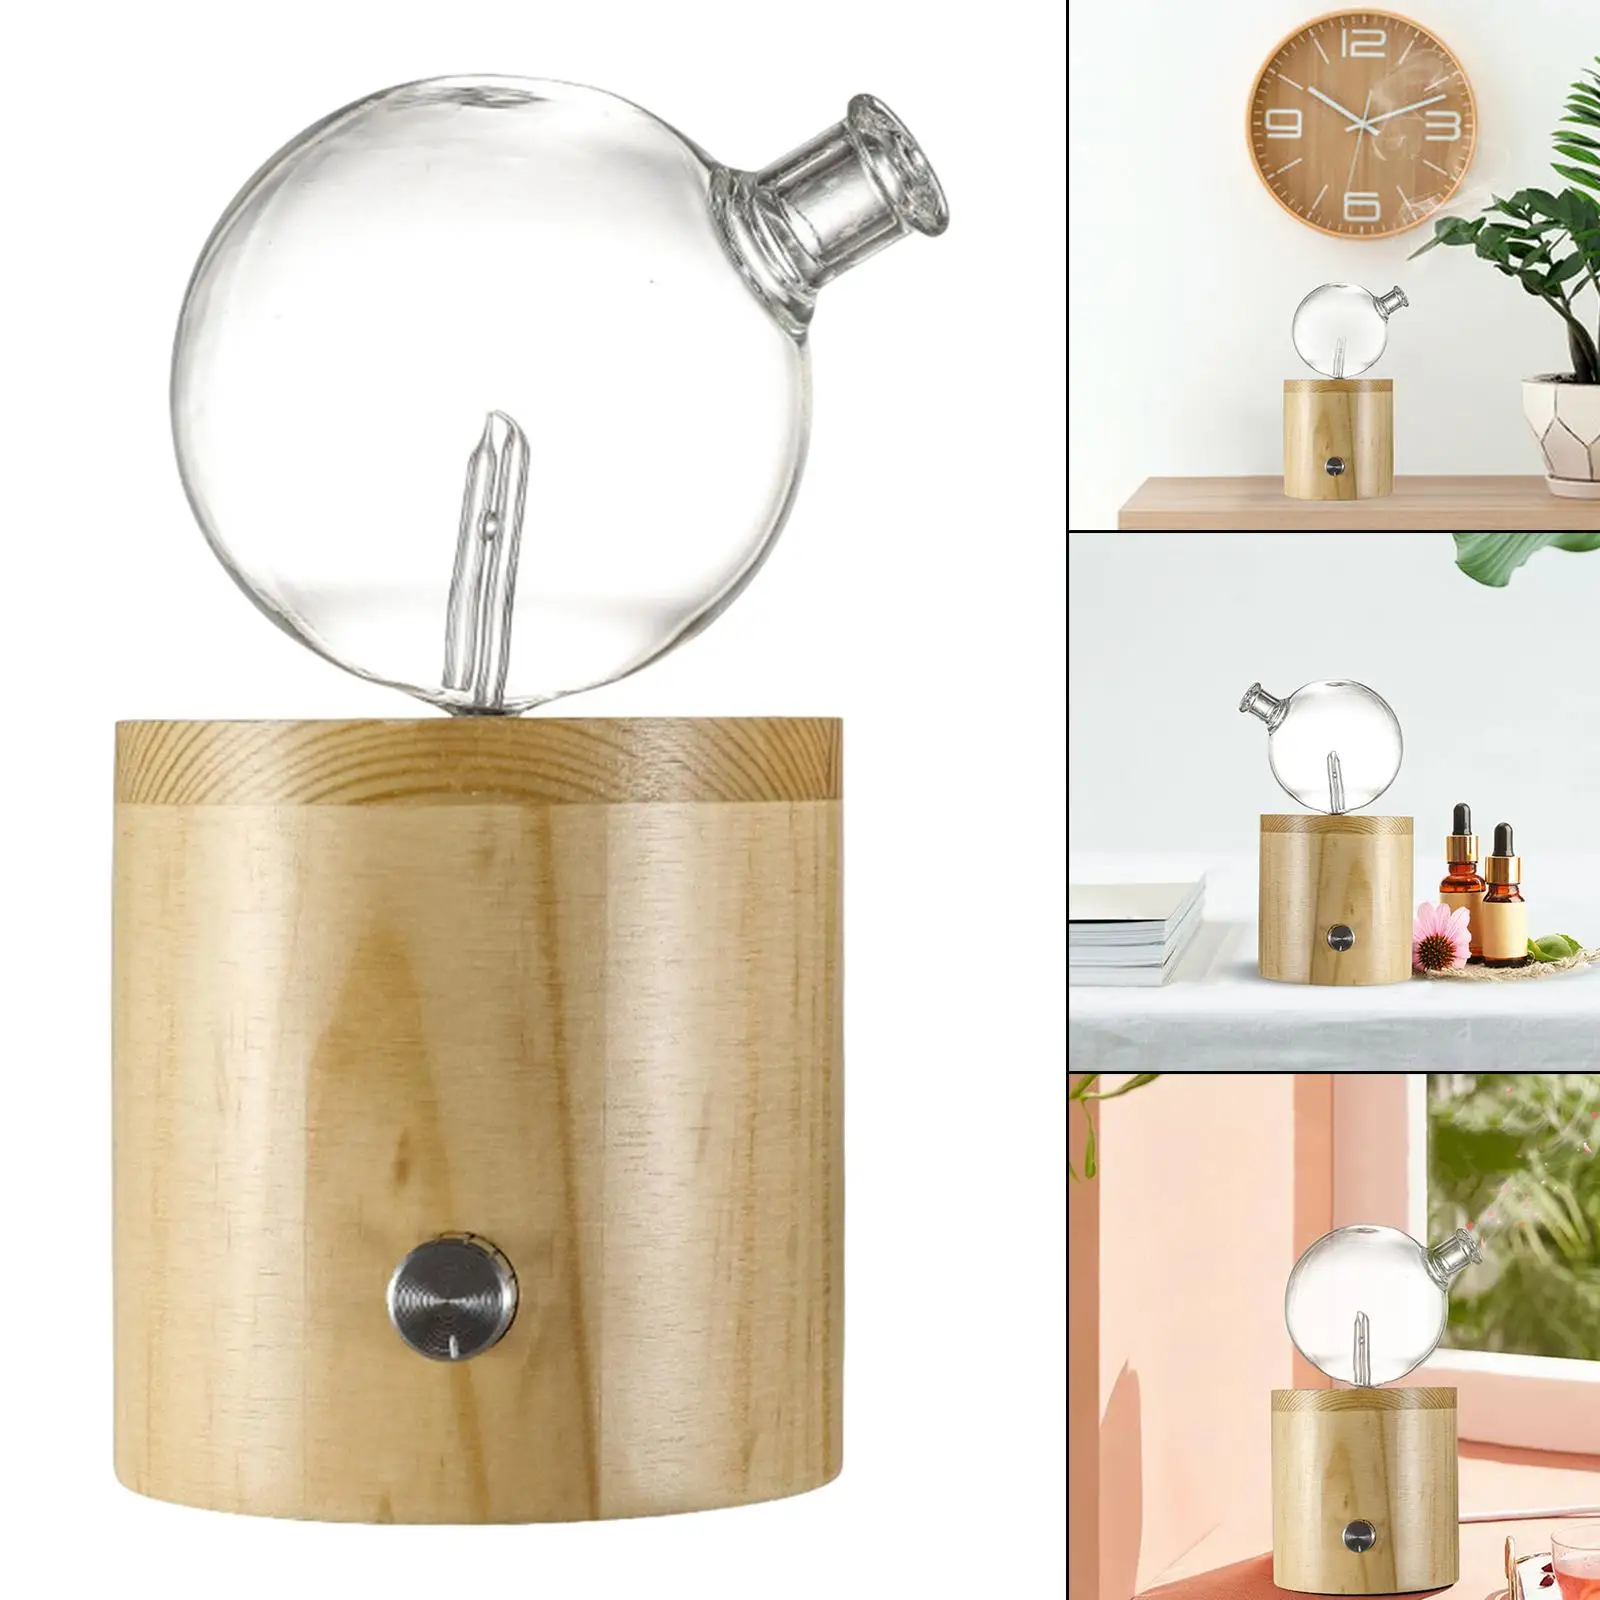 Waterless Essential Diffuser, Silent Portable Wood Base Glass Humidifier Nebulizing Professional for Bedroom Home Yoga Hotel